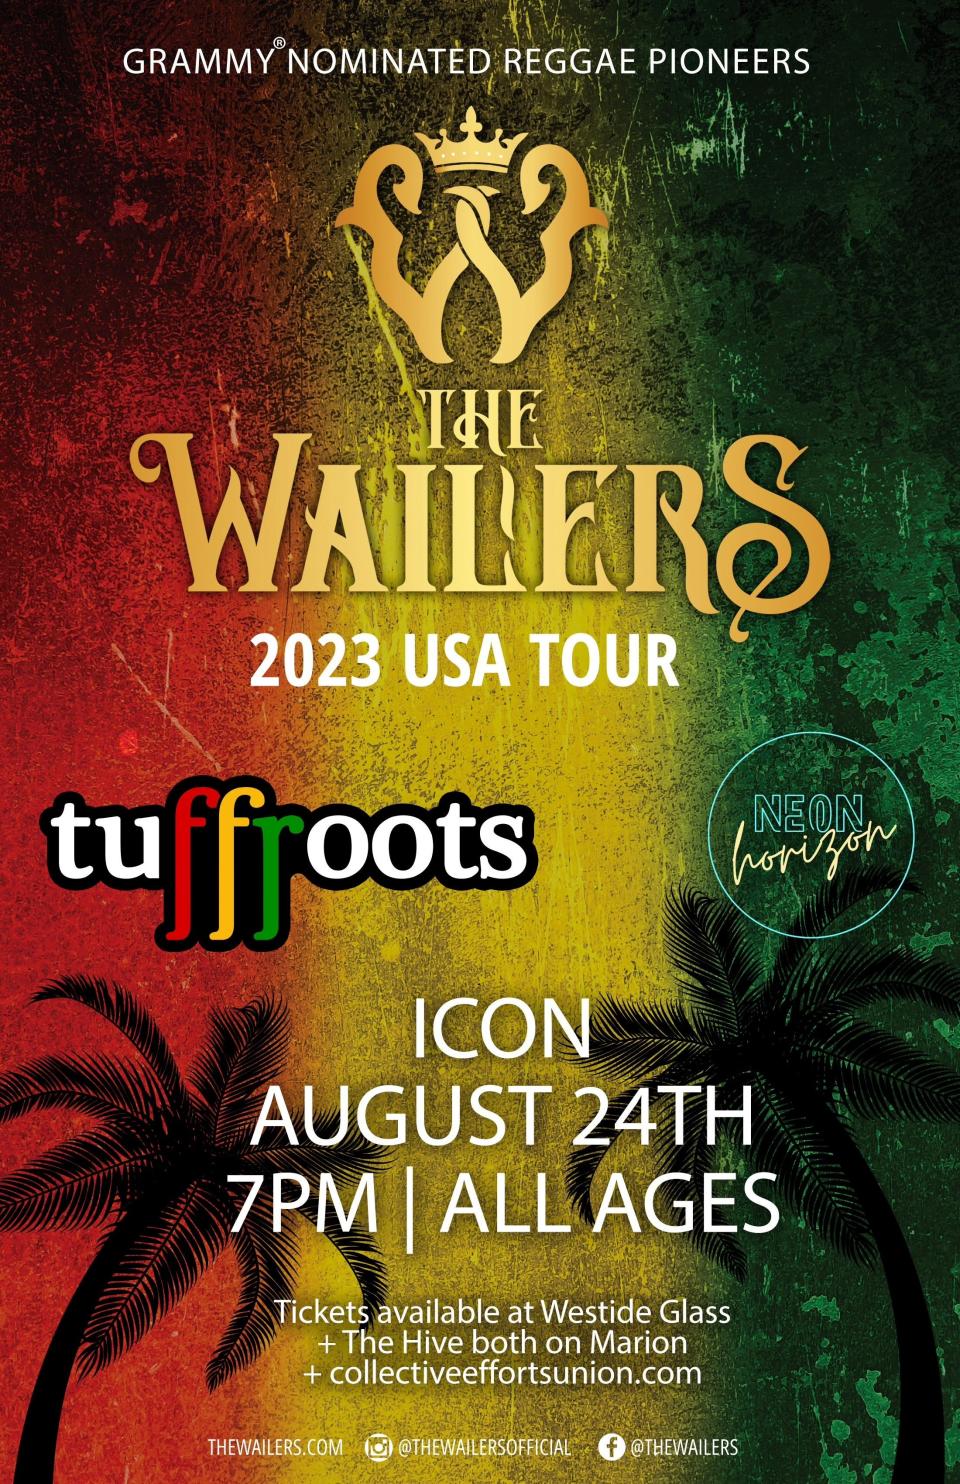 The Wailers concert poster